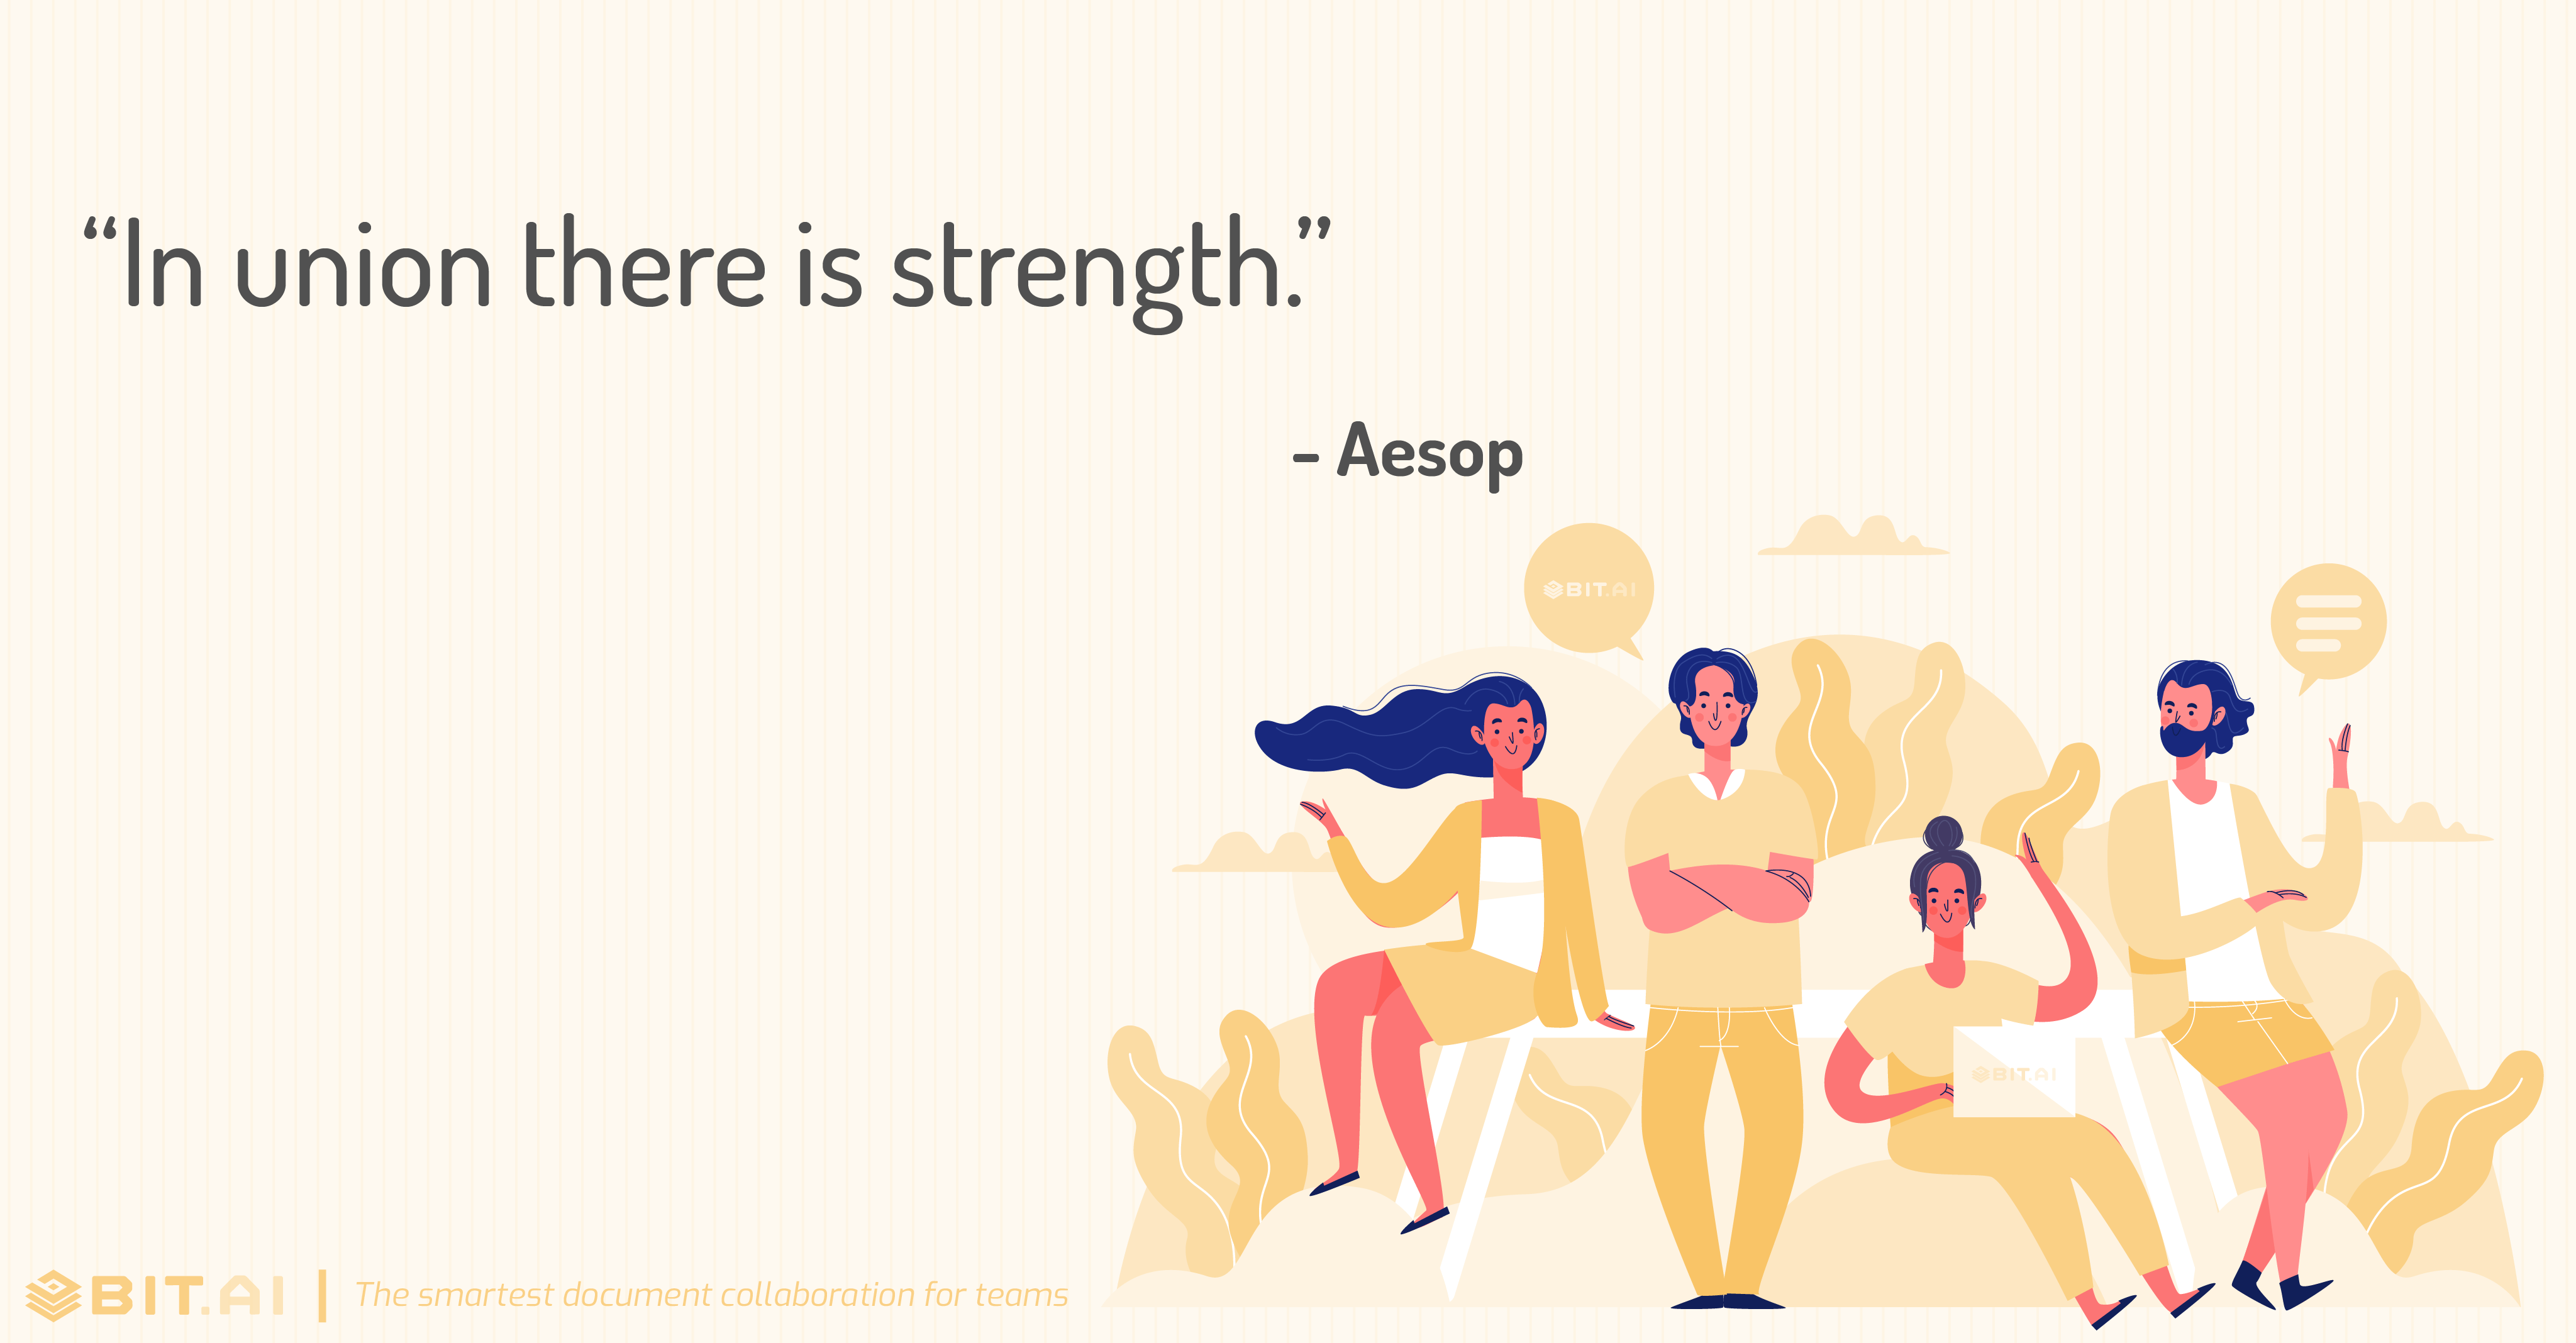 “In union there is strength.” - Aesop